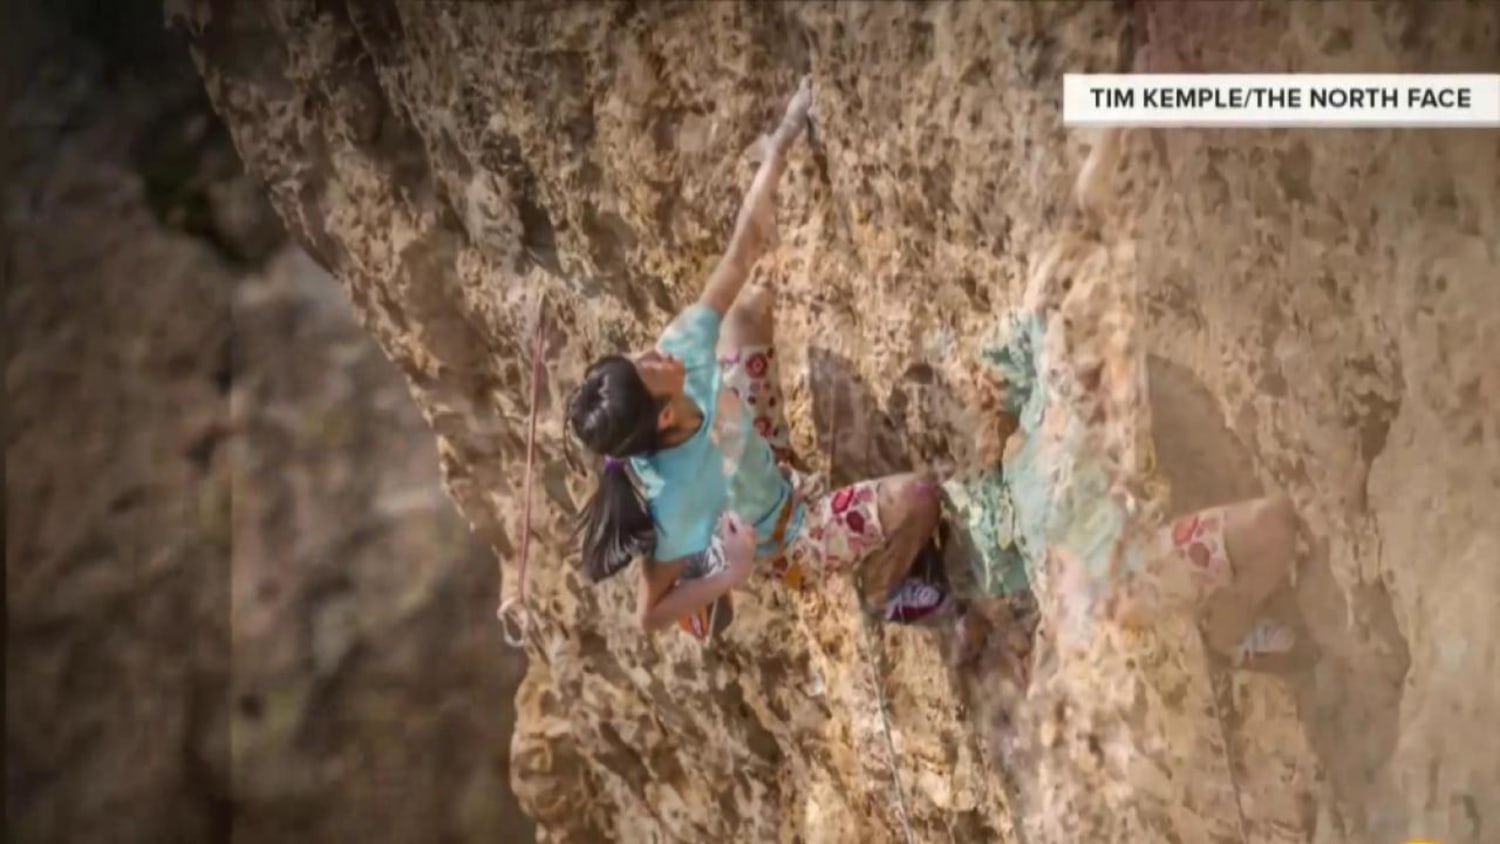 Free Climbing Film Shows First Ascent in Japan